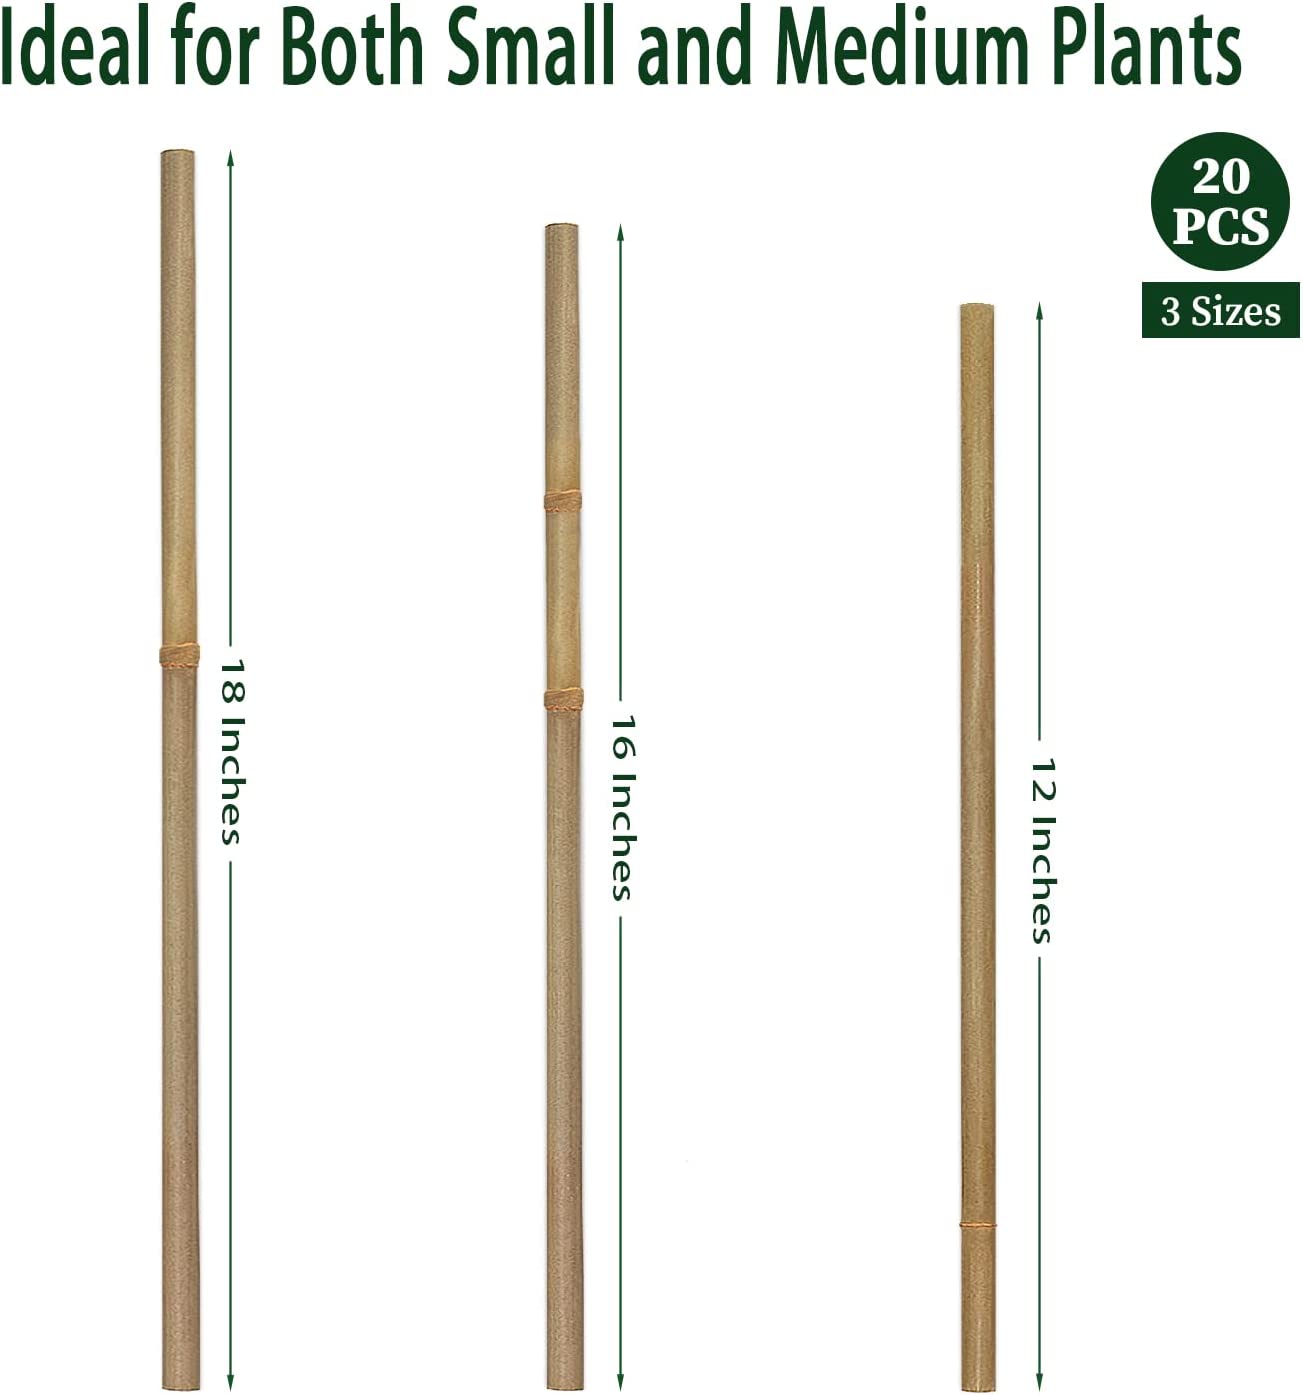 Bamboo Gardening Plant Stakes - Durable and Eco-Friendly for Indoor/Outdoor Gardening